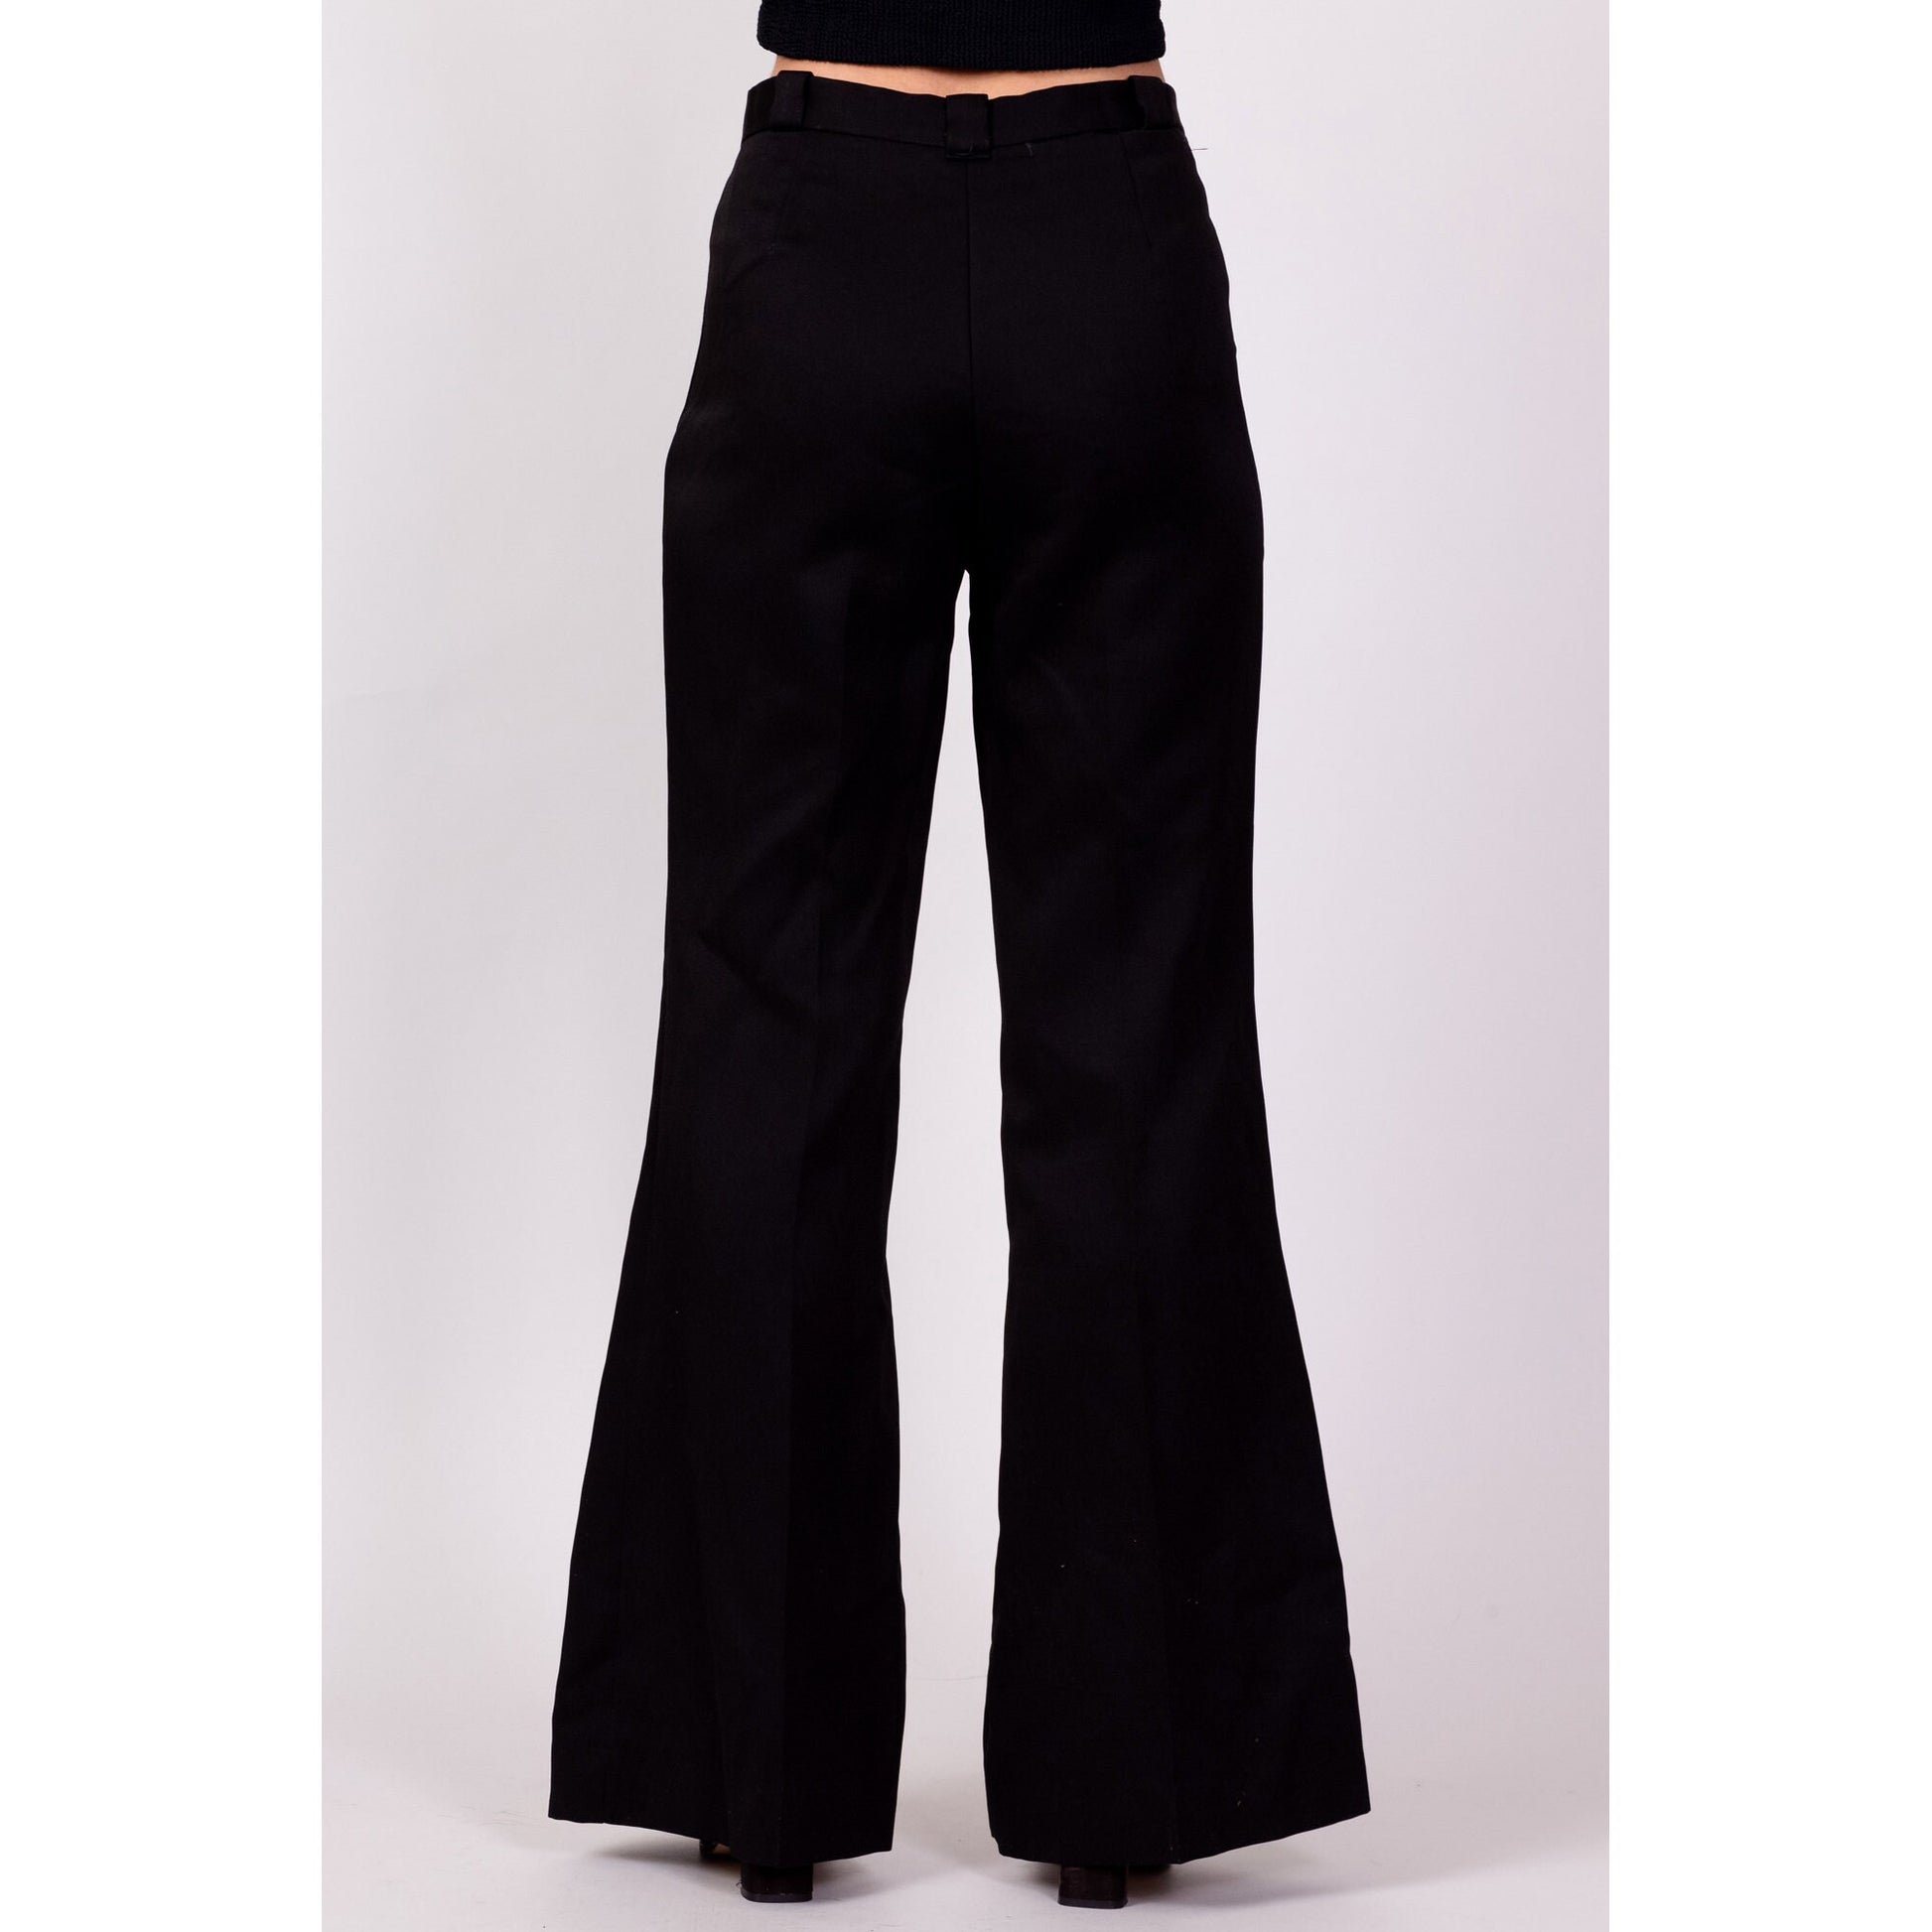 70s Black High Waisted Flared Pants - Petite Small, 26" 